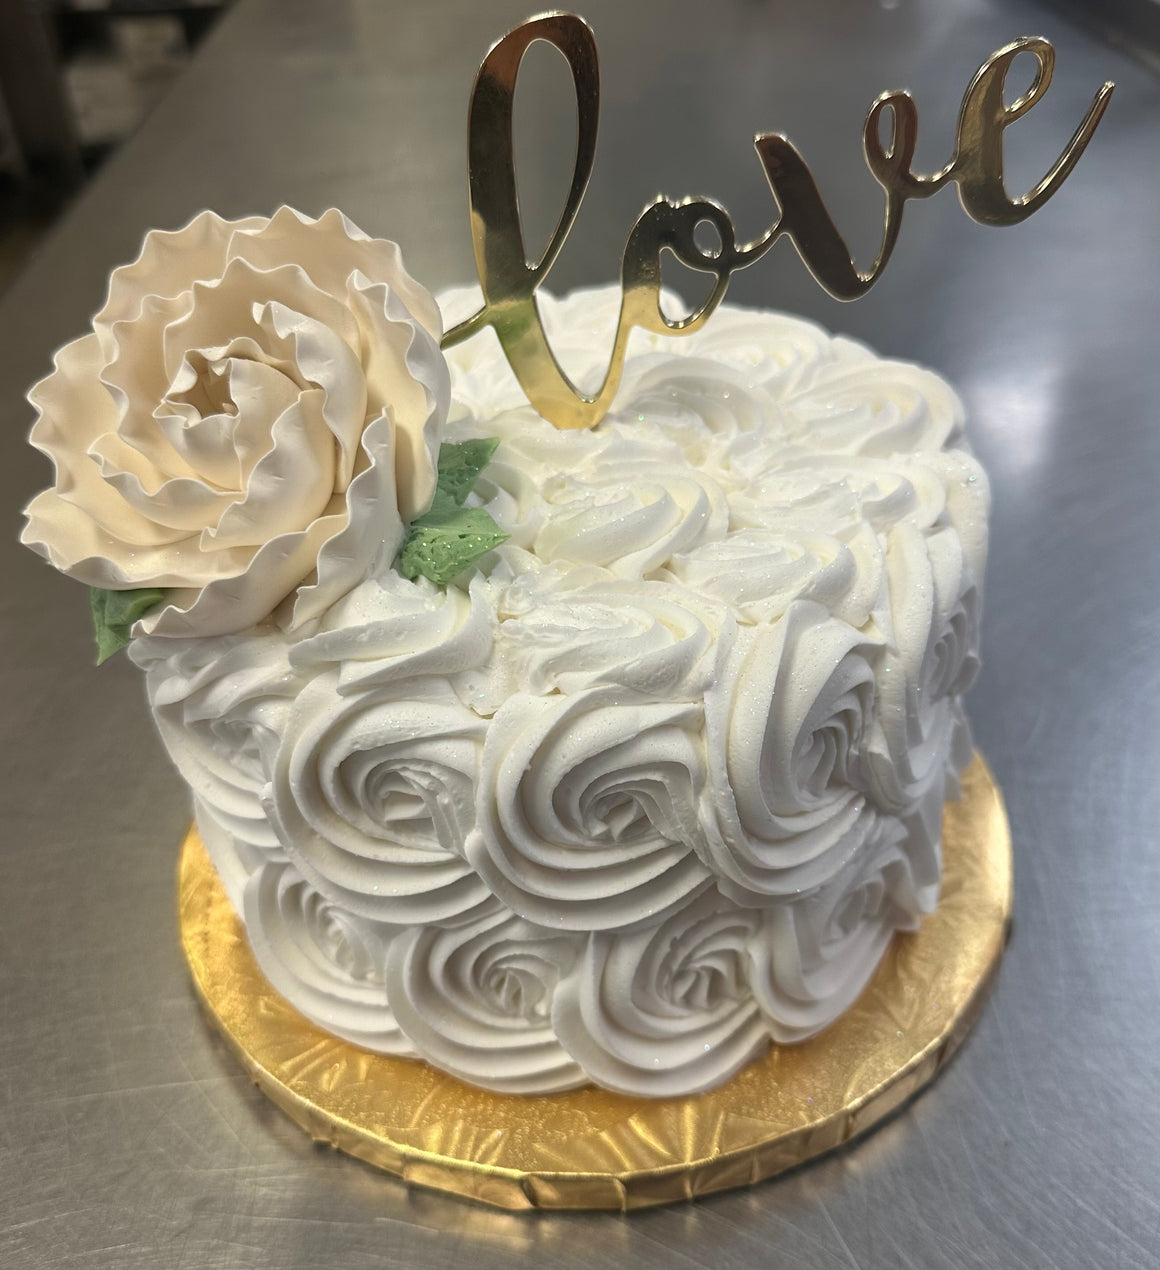 Country Rose with "Love" Topper and Gum Paste Flower 6" Round Cake